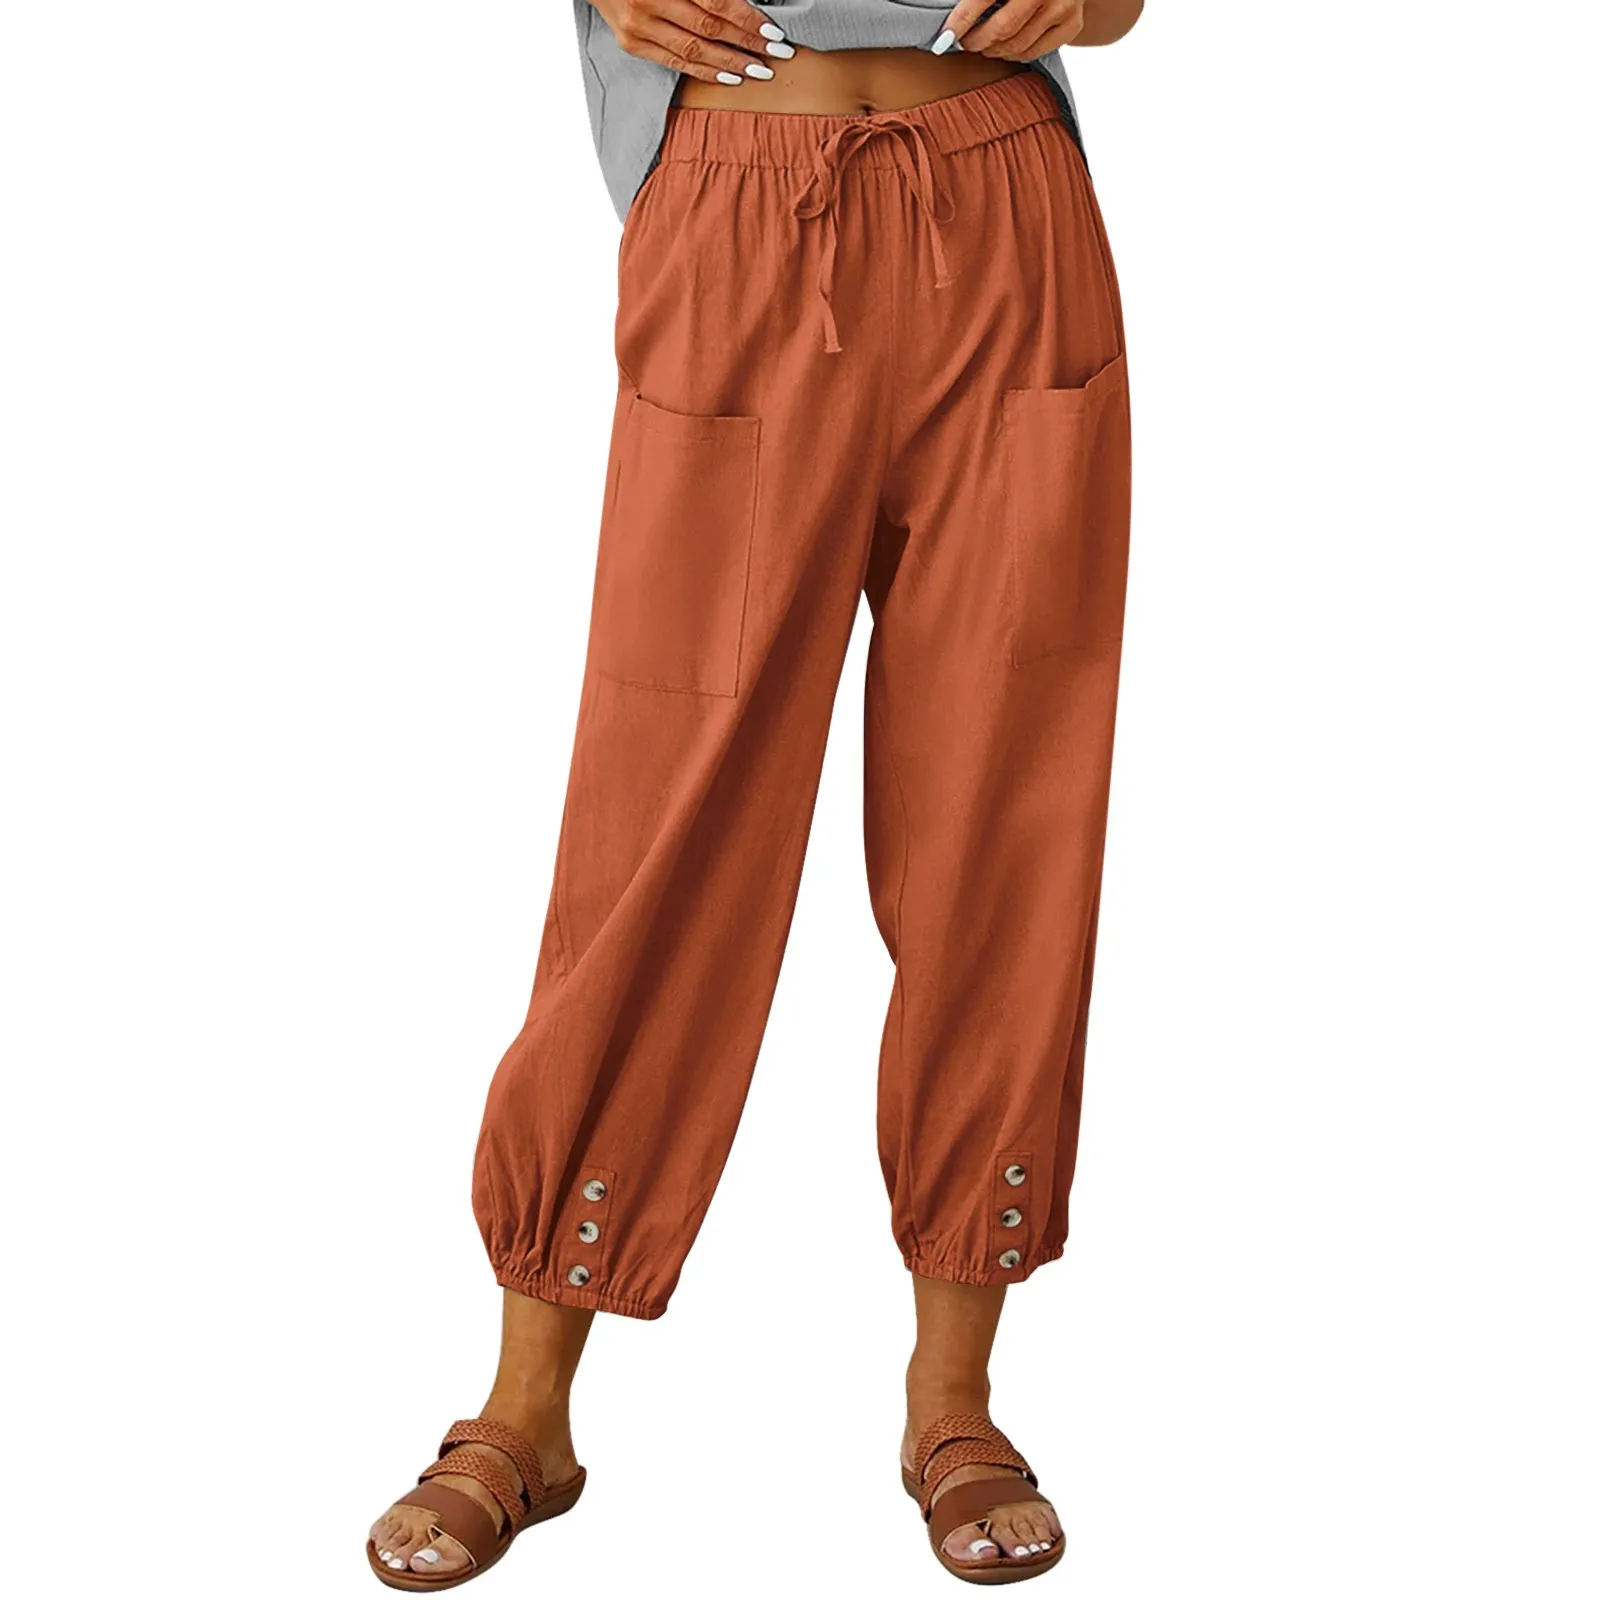 Casual Solid Color Cotton Harem Pants for Women Drawstring Elastic Waist Sweatpants with Pockets Button Loose Baggy Trousers